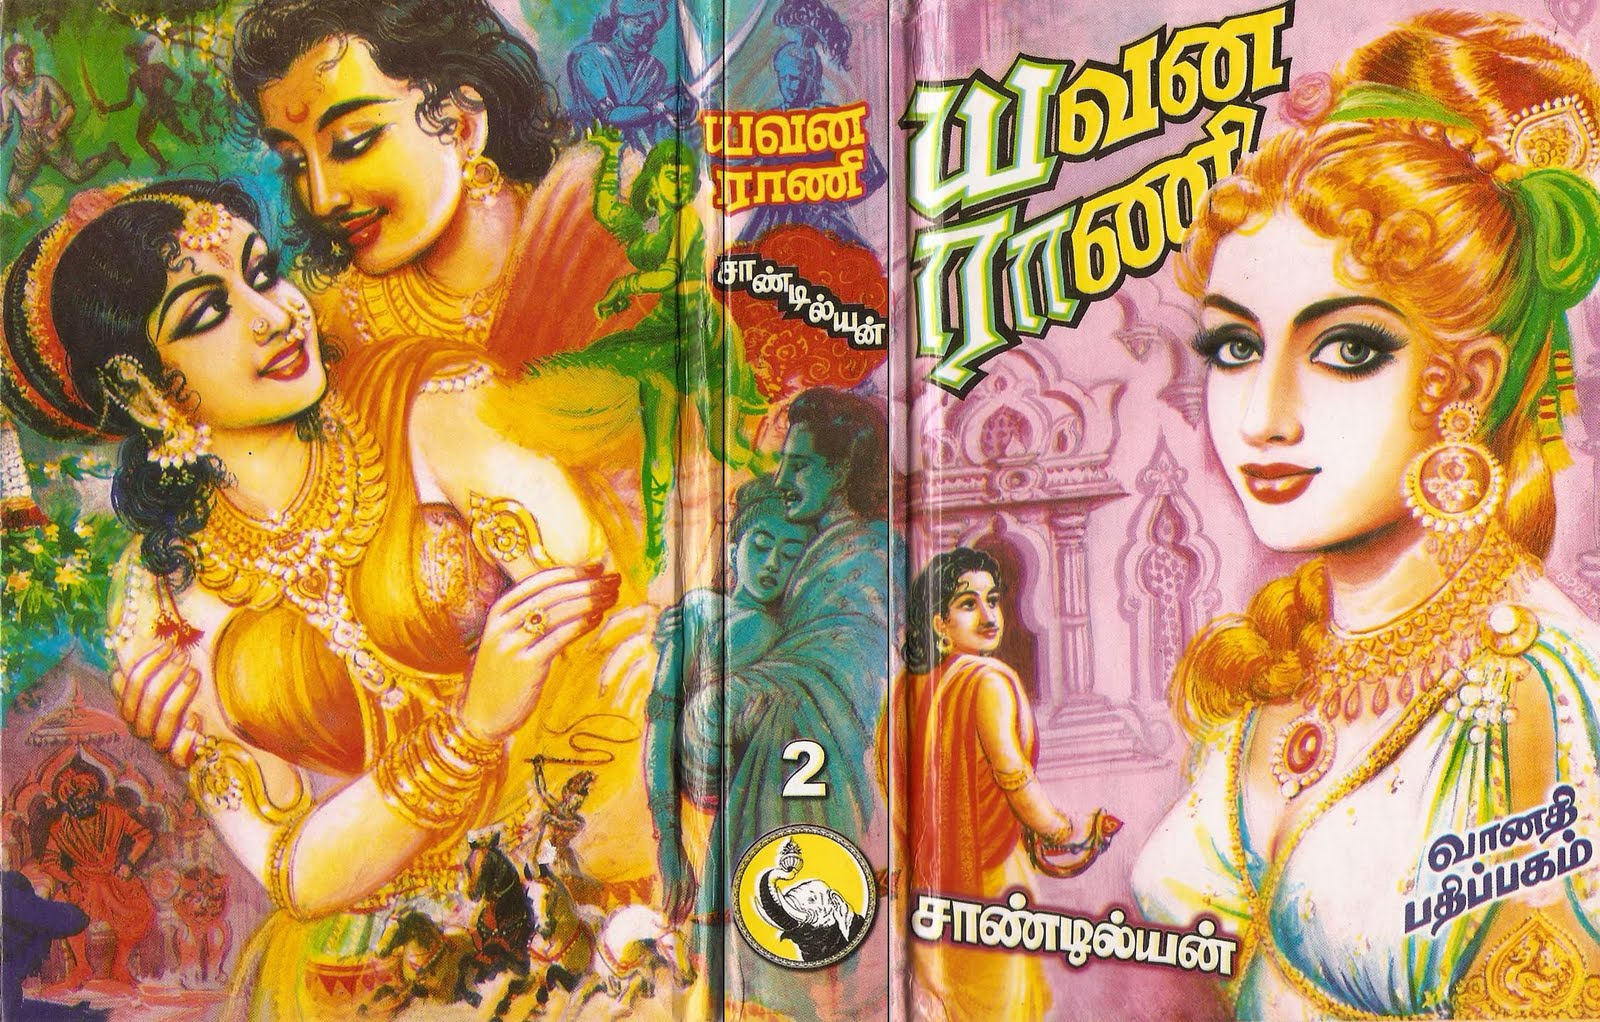 The Historical Tamil Novels of Chandilyan: Cover Art by Latha.